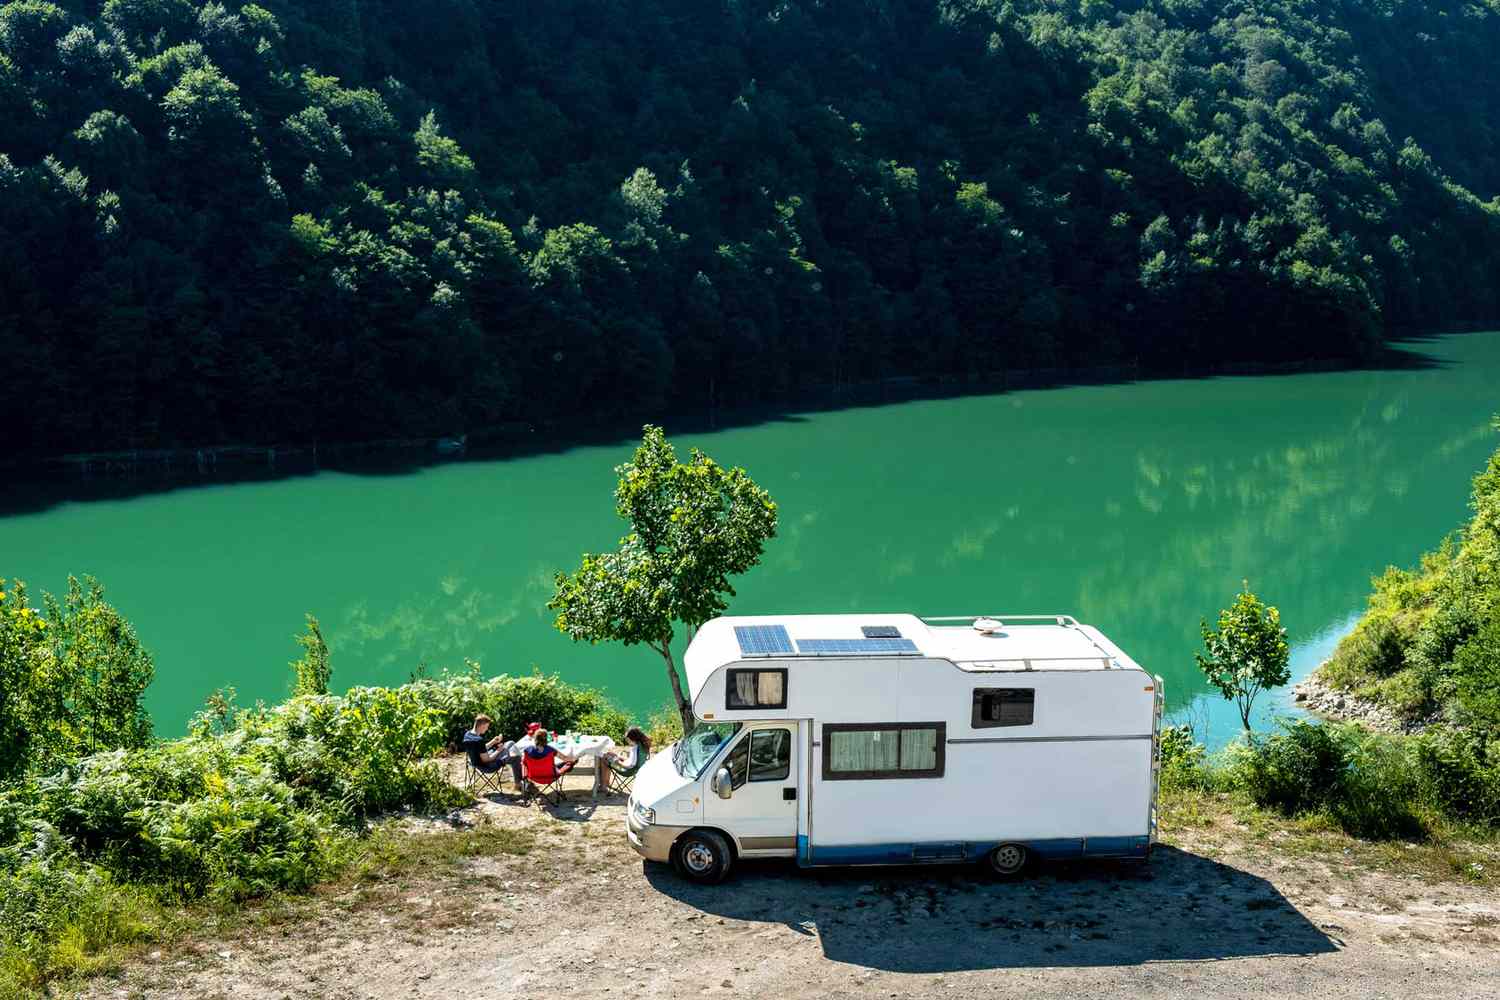 Planning an RV Trip This Summer? This Site Will Save You Some Serious Money